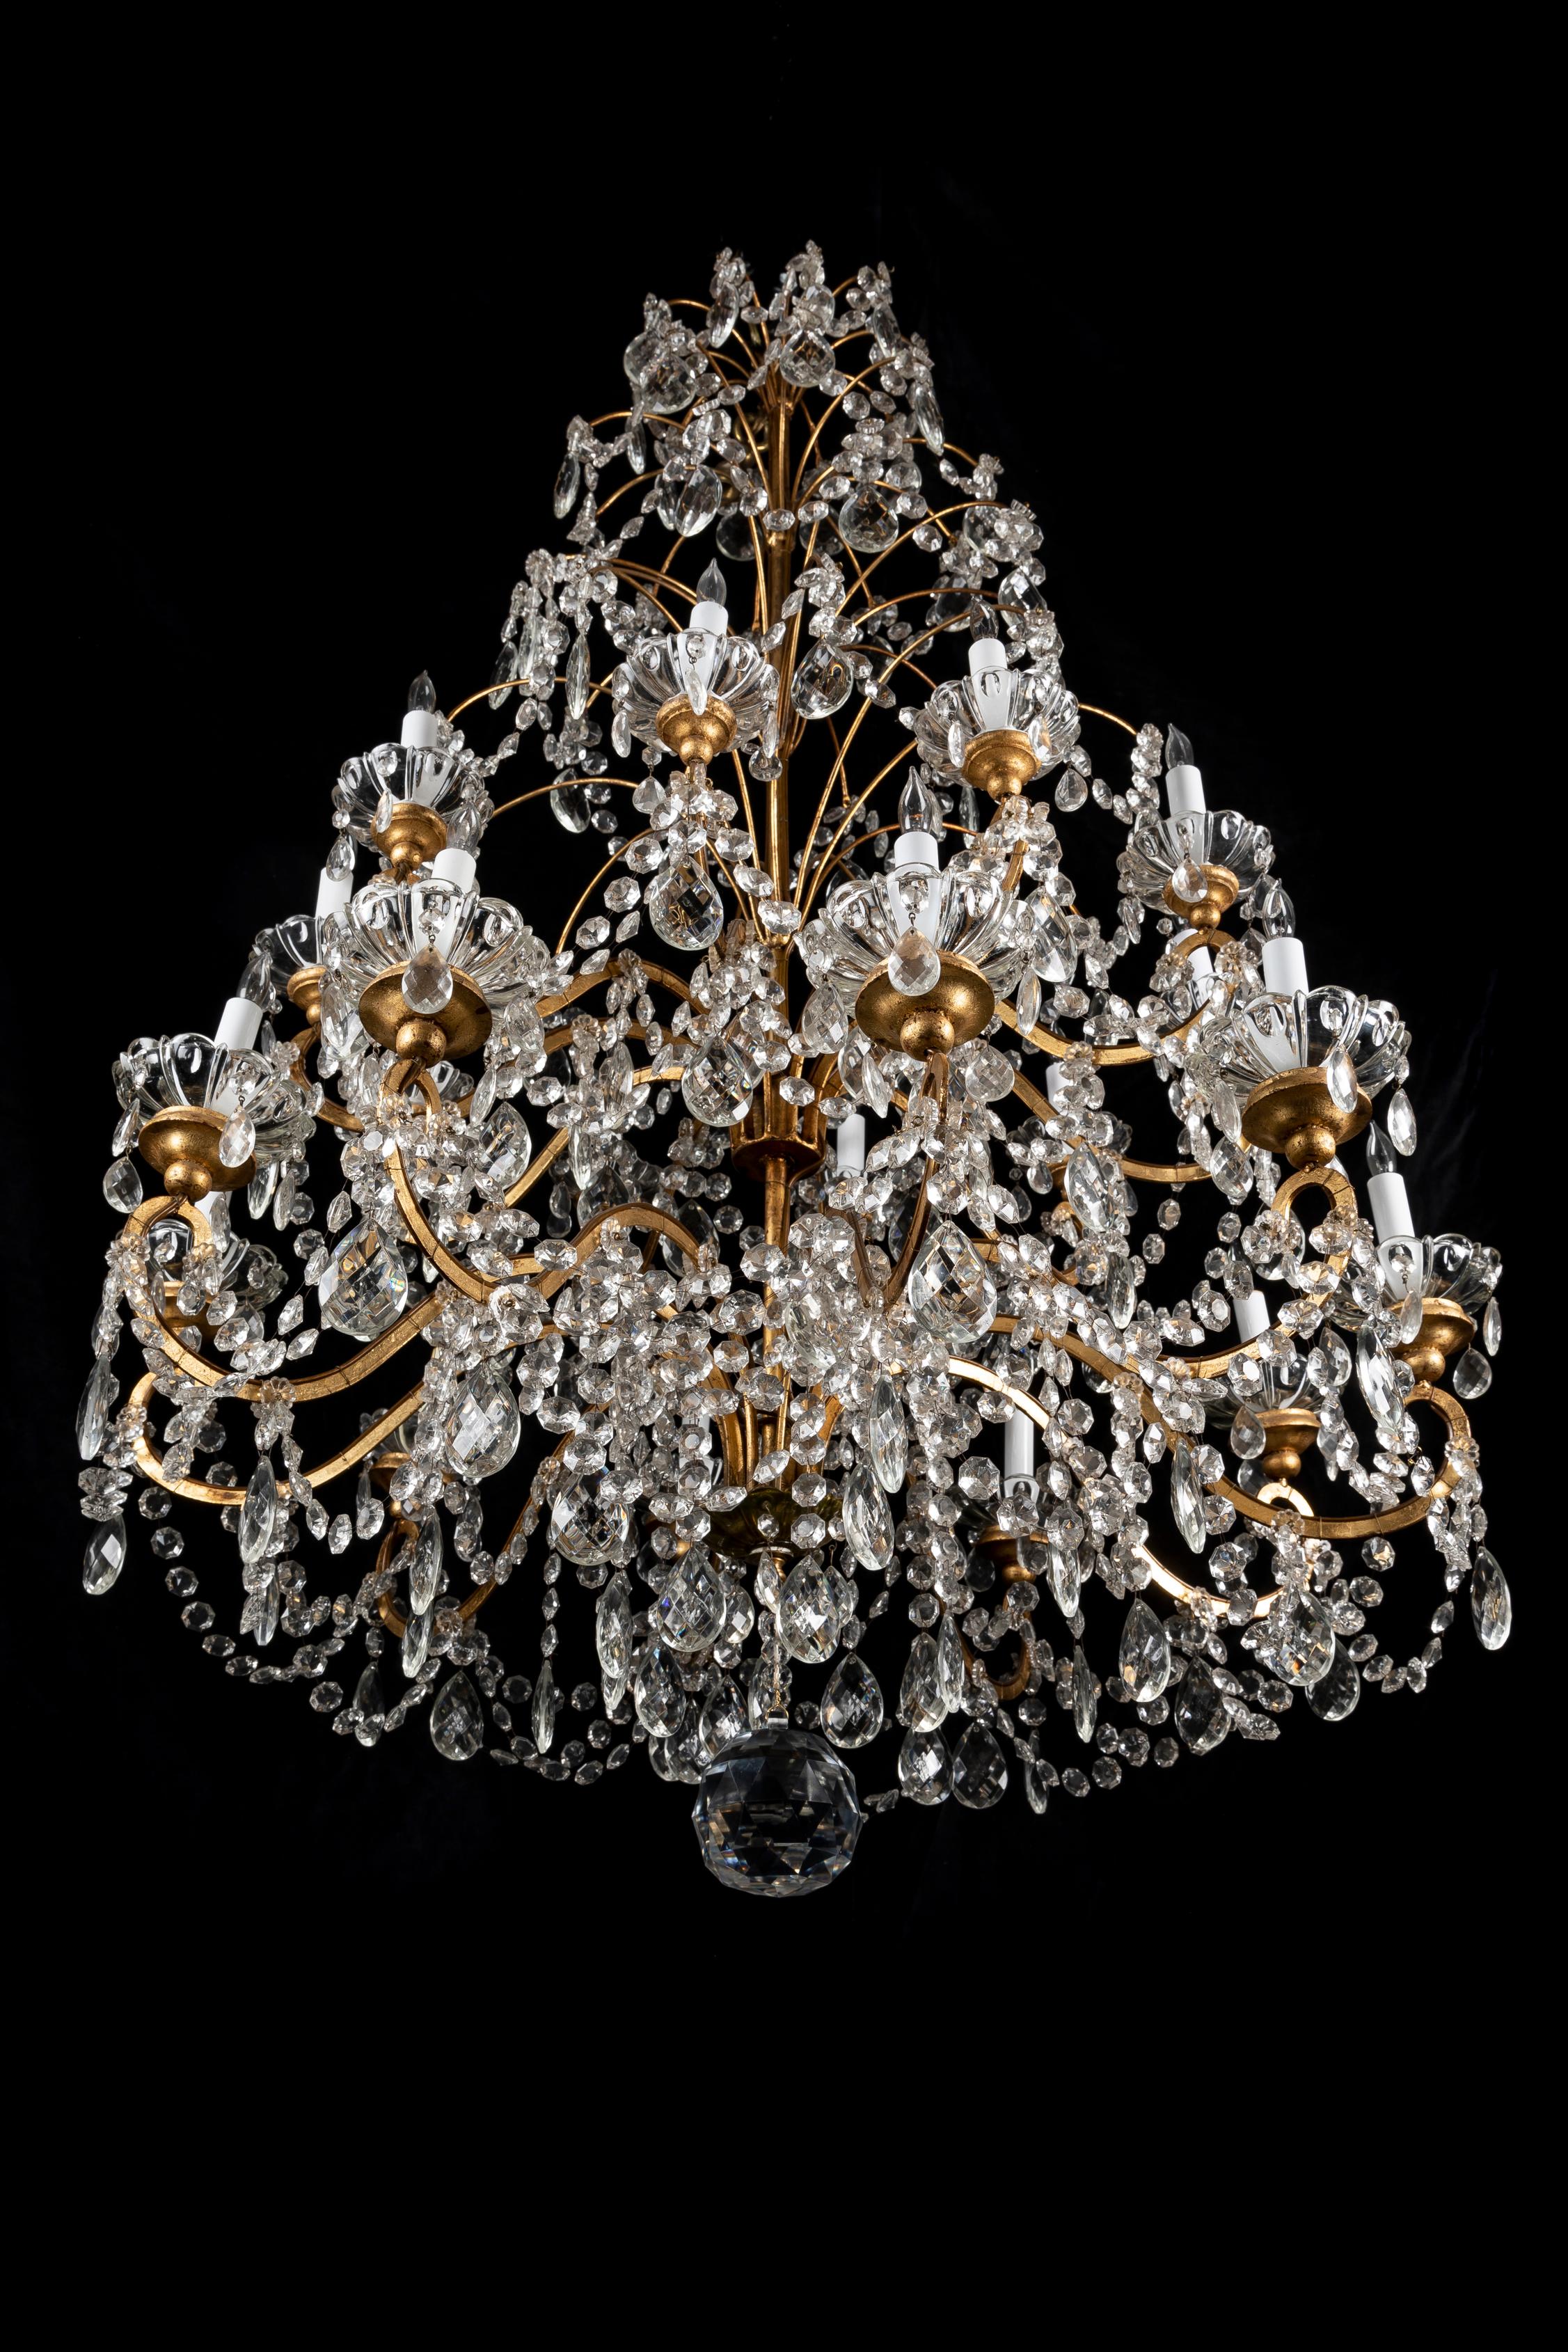  Pair of Large Antique French Louis XVI Style Gilt Bronze & Crystal Chandeliers  For Sale 4